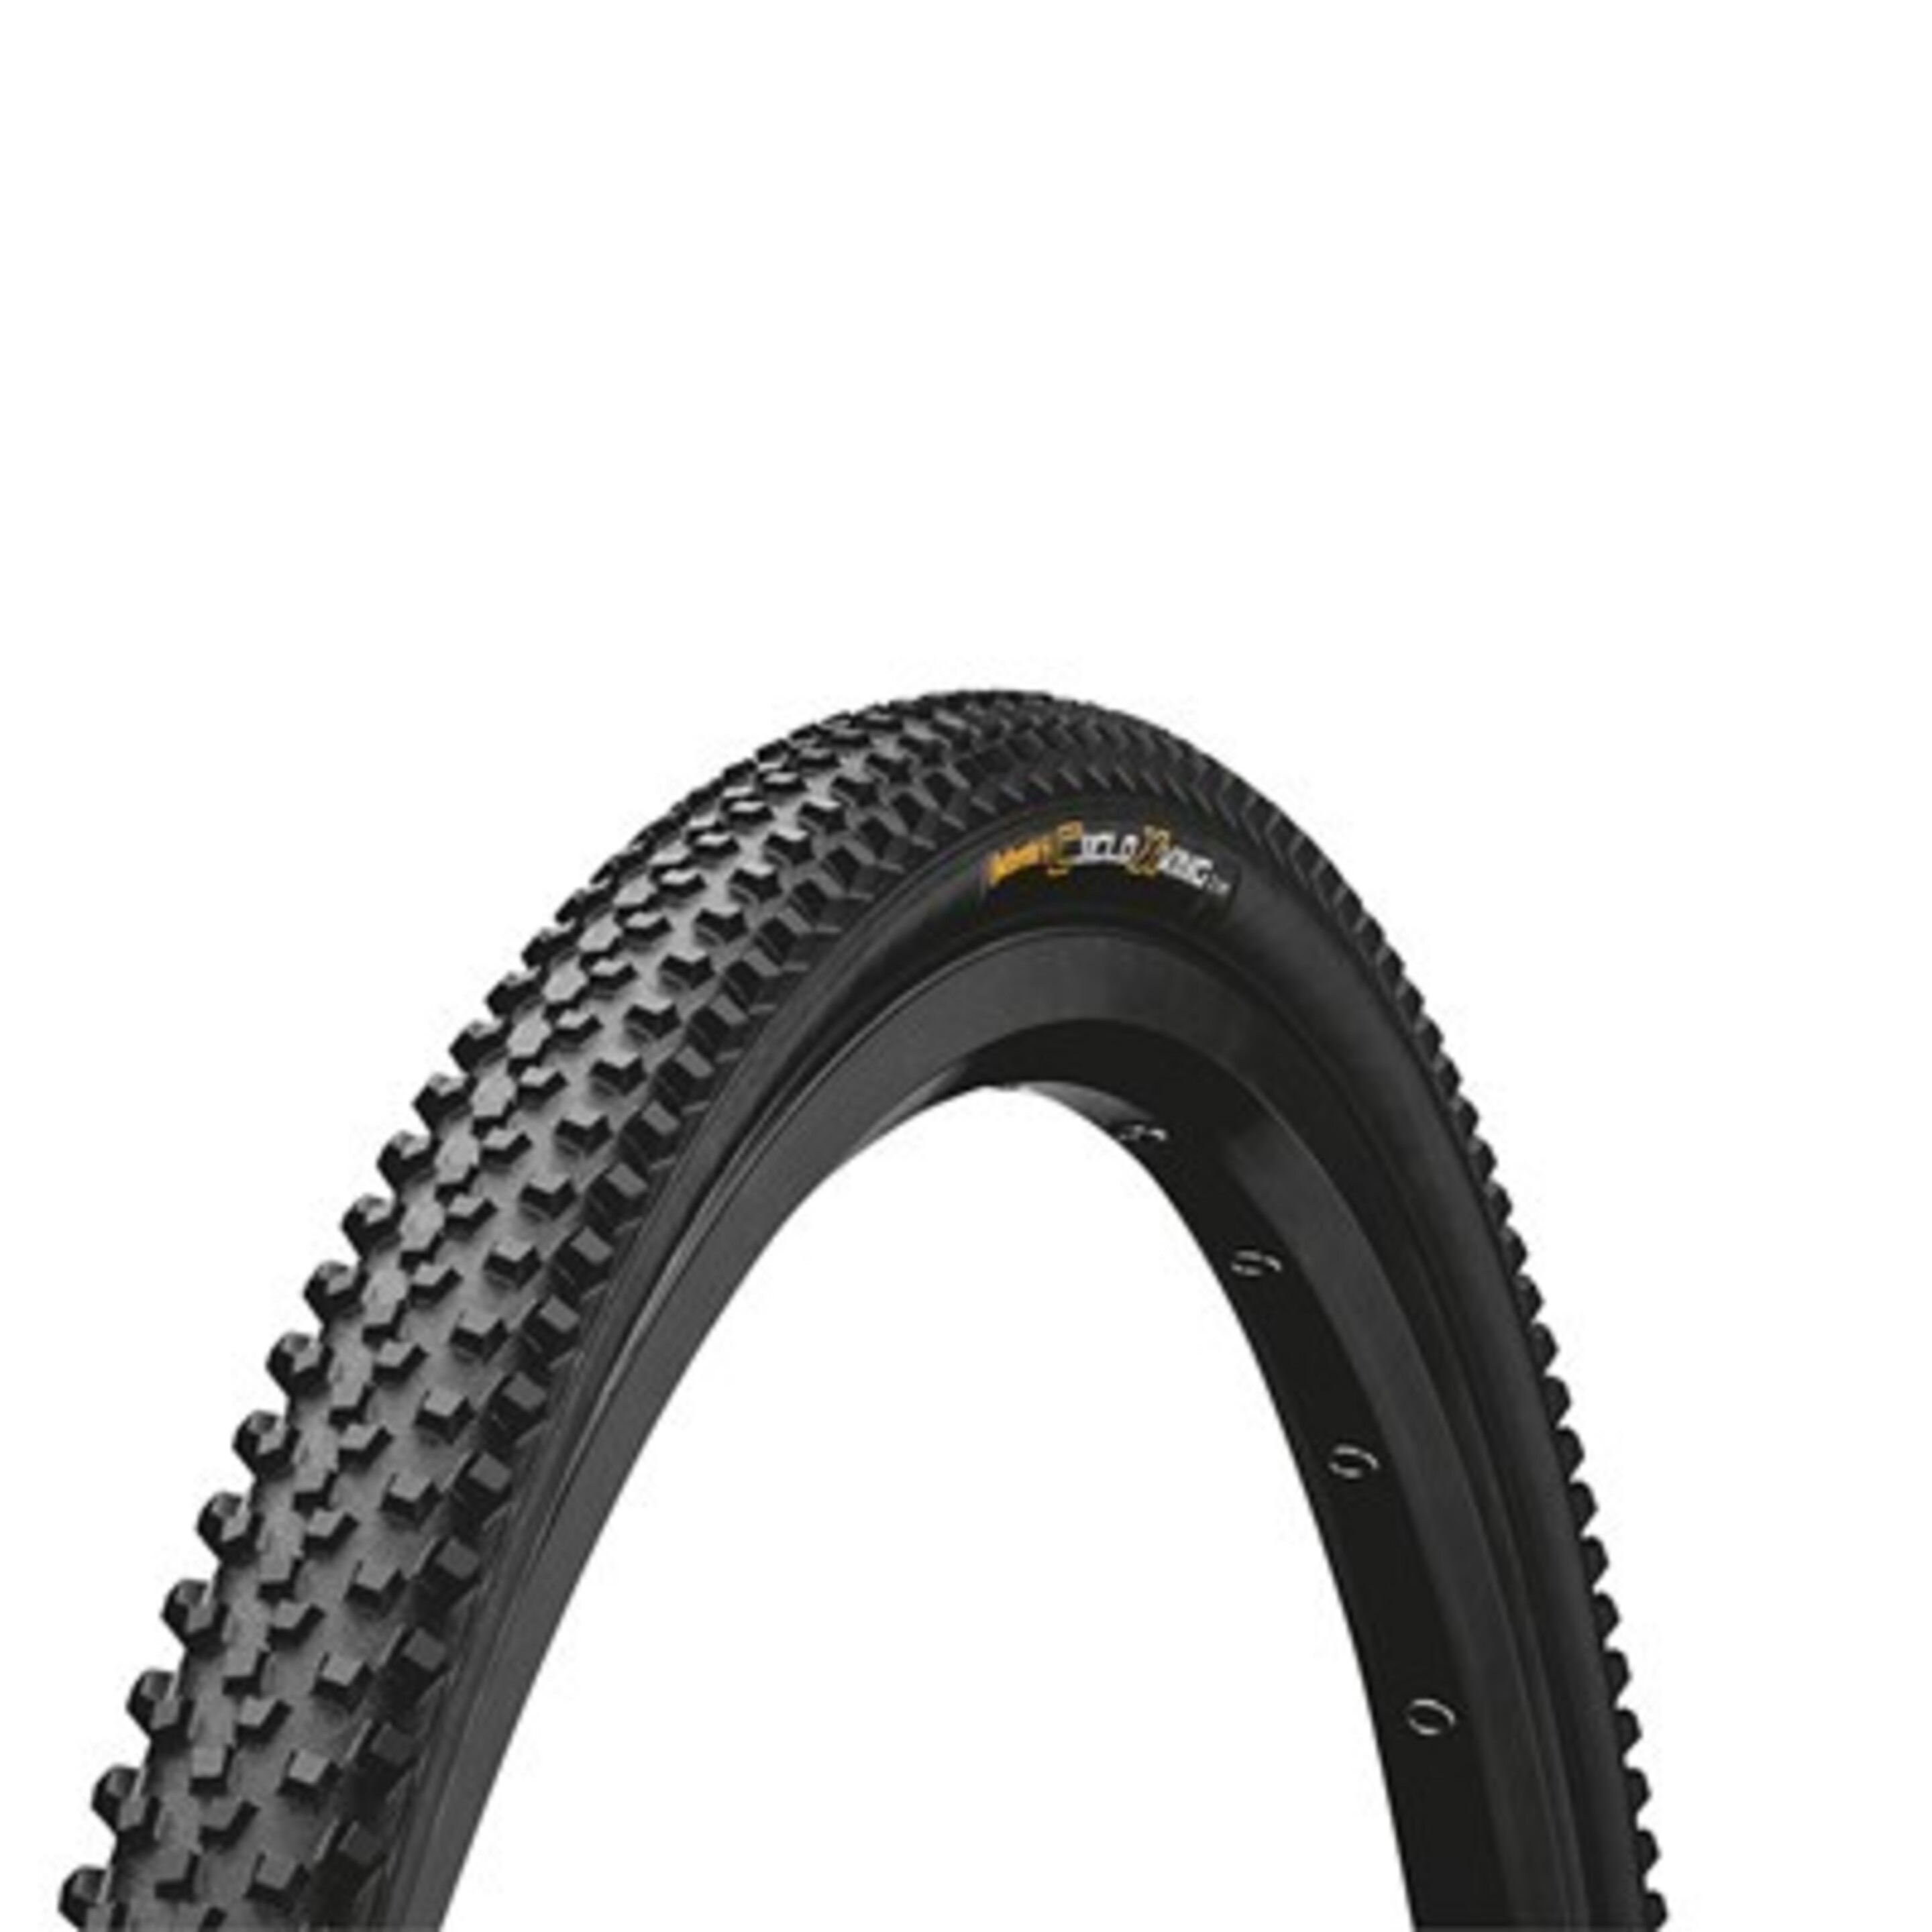 Cubierta Continental Ciclo Cross Xking Rs Cx 700x32c Pl